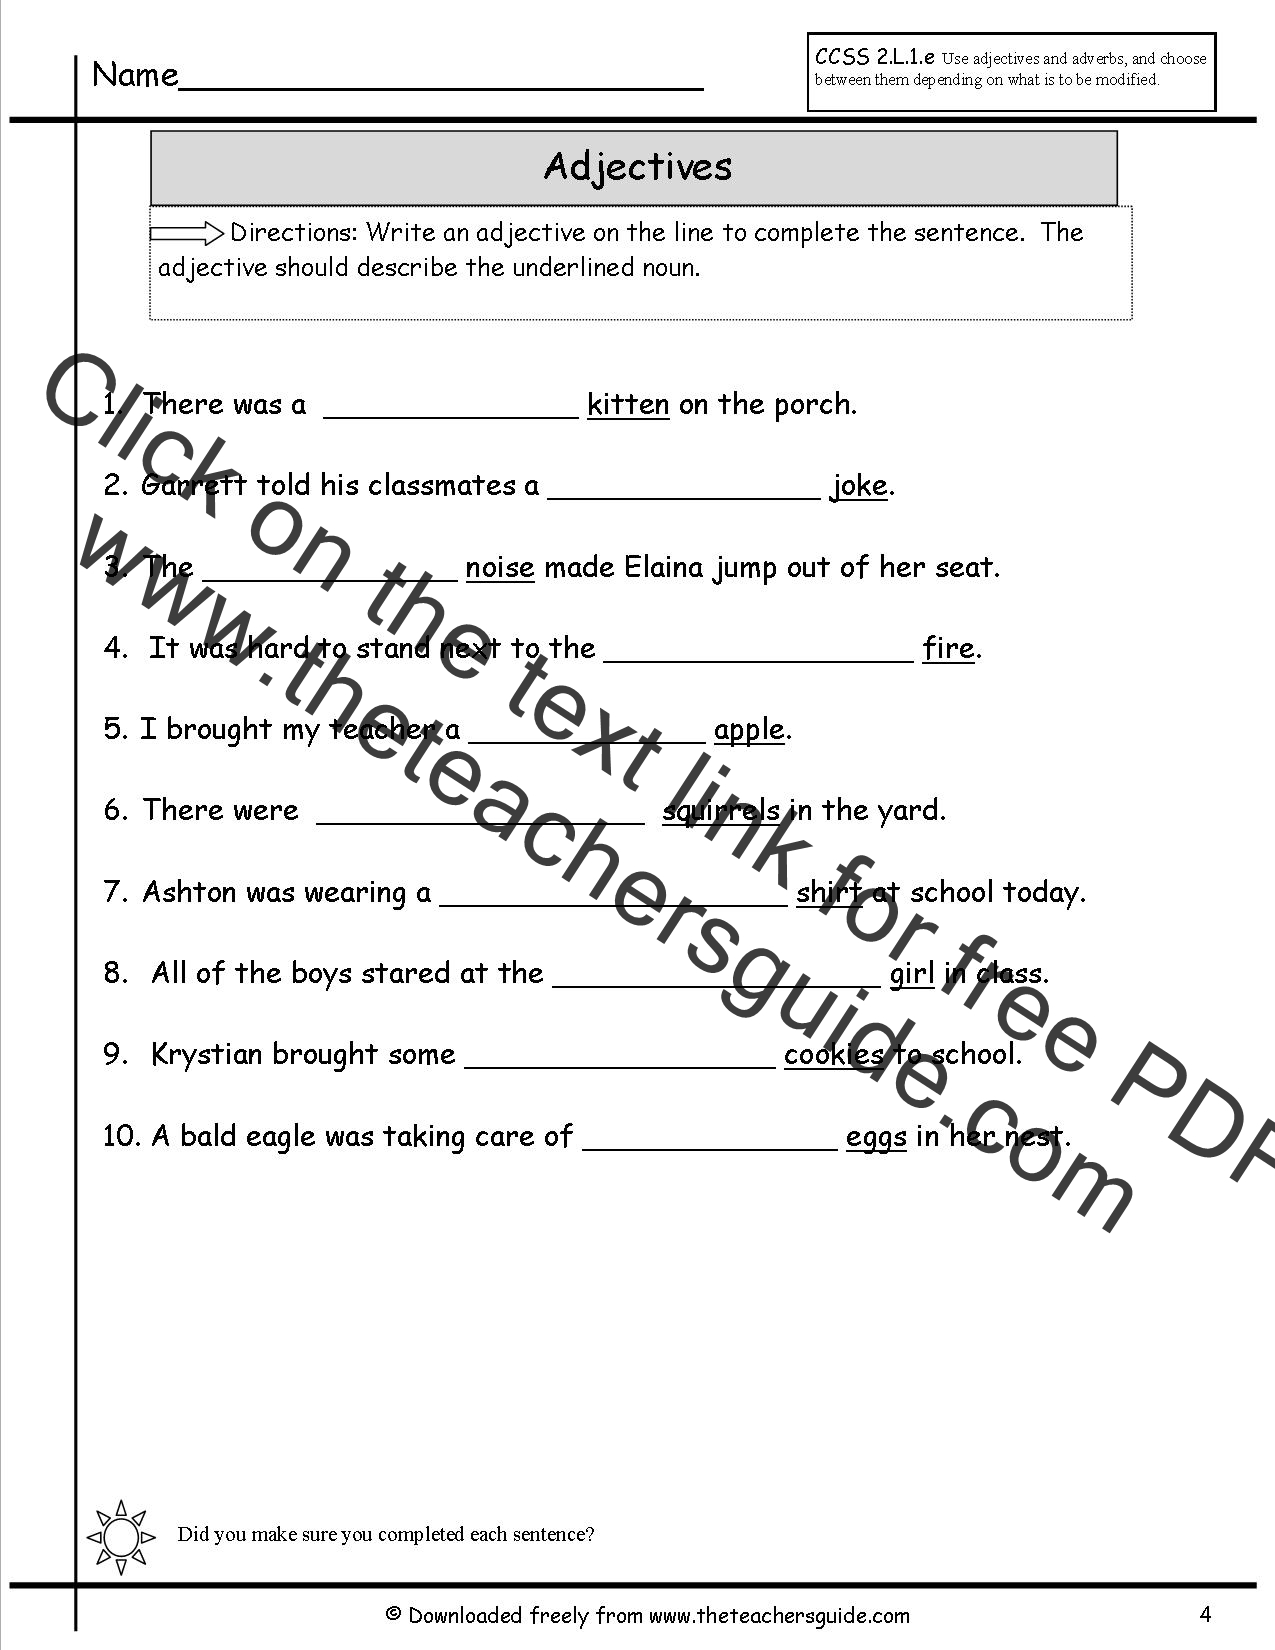 Adjectives Worksheets From The Teacher s Guide